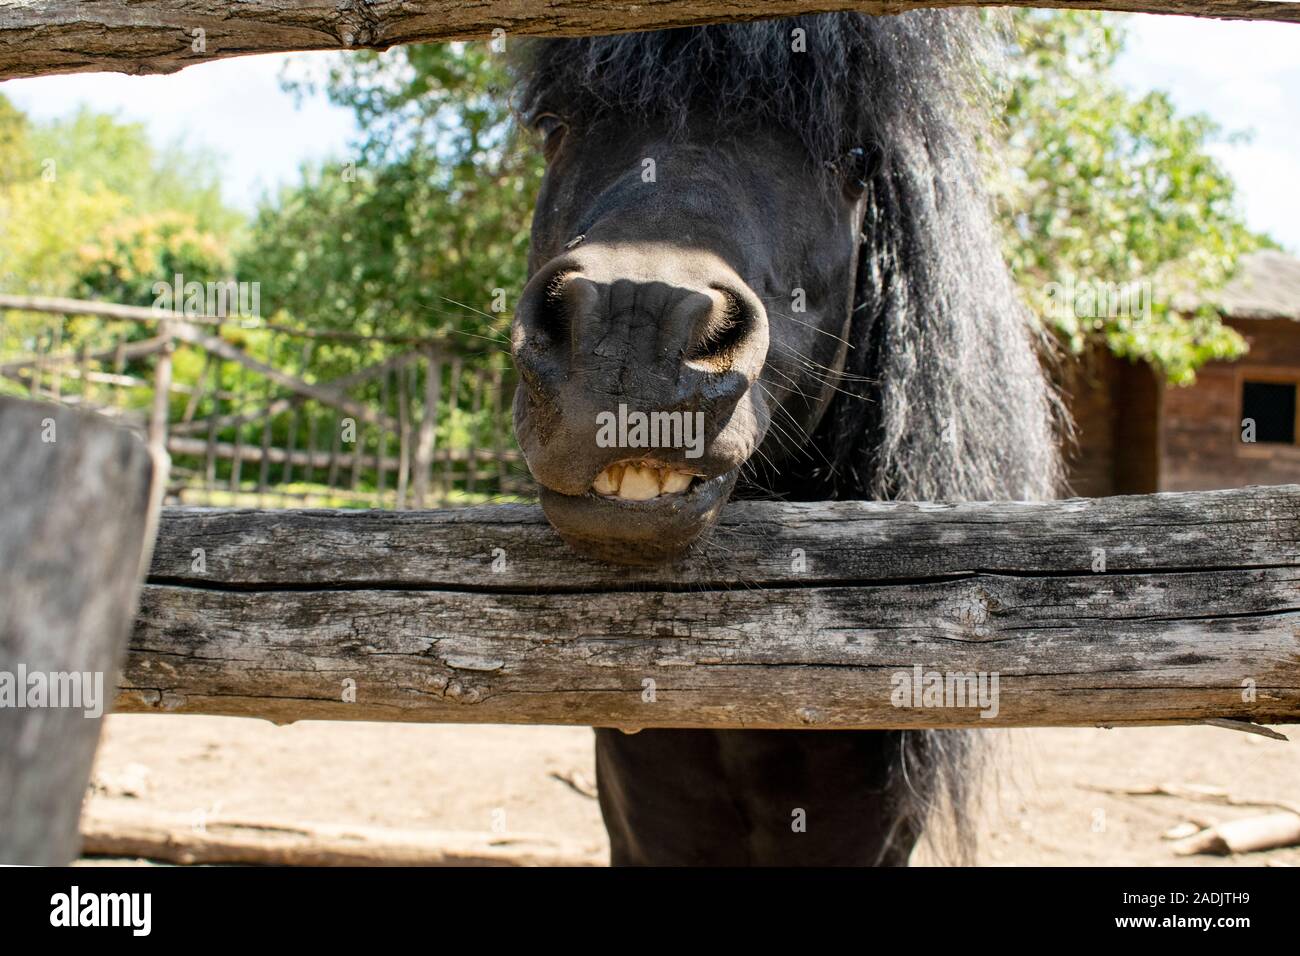 Bkack young horse looking at the camera with white teeth smile. Stock Photo